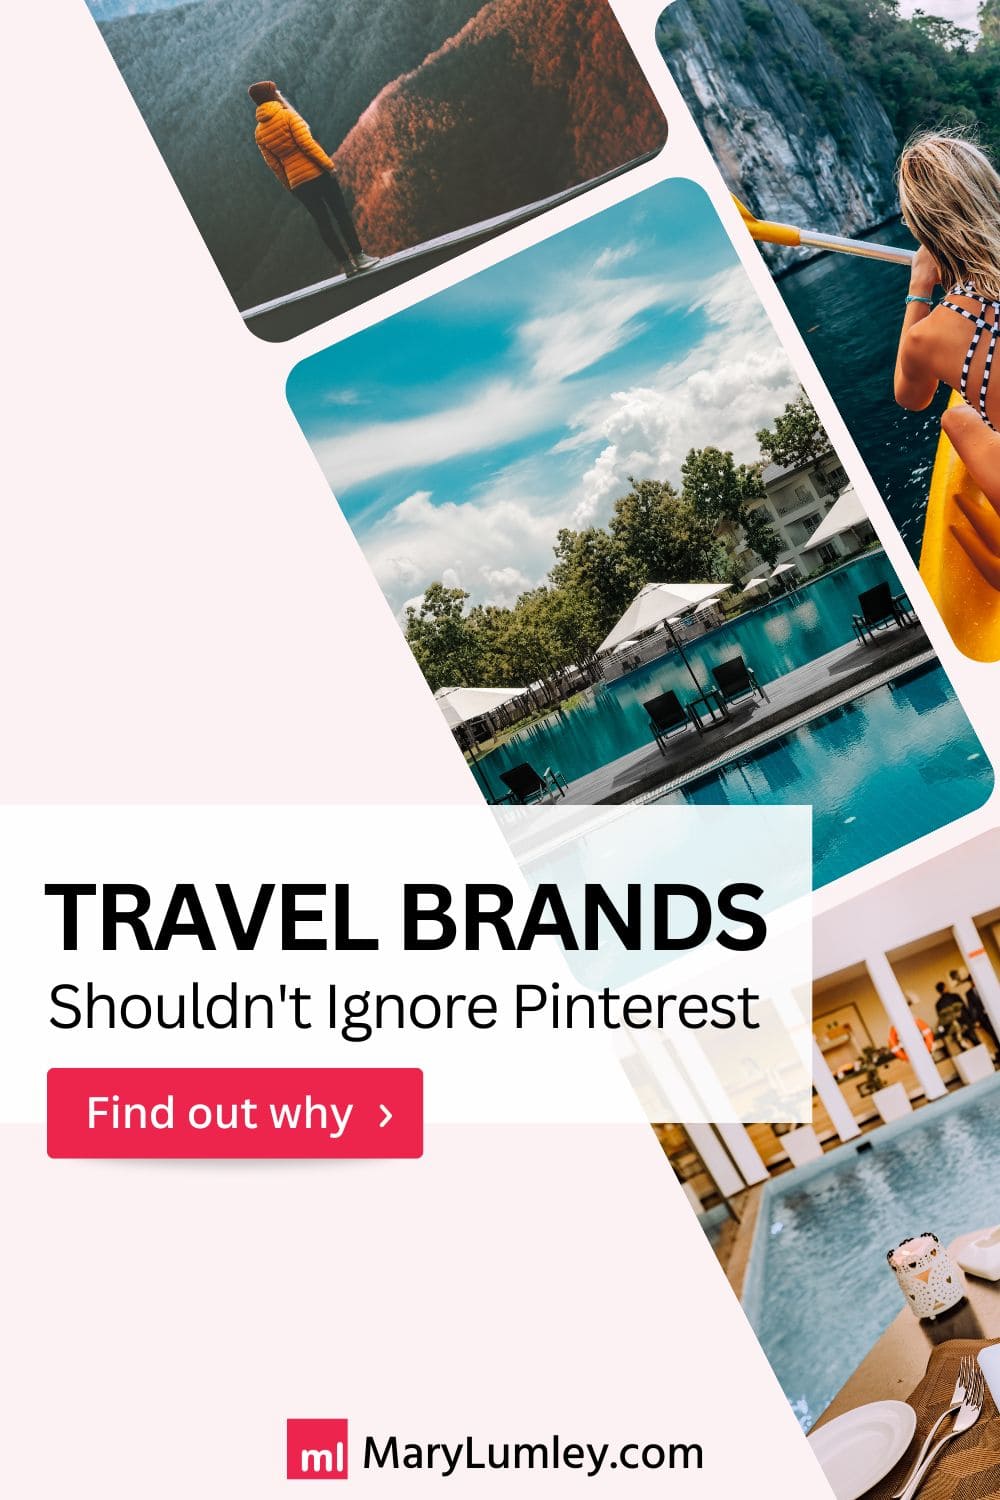 Find out how travel advertising on Pinterest can turn wanderlust into bookings. Discover effective strategies for engaging potential travelers. Ready for the journey? | Mary Lumley – Pinterest Marketing for e-Commerce & Travel